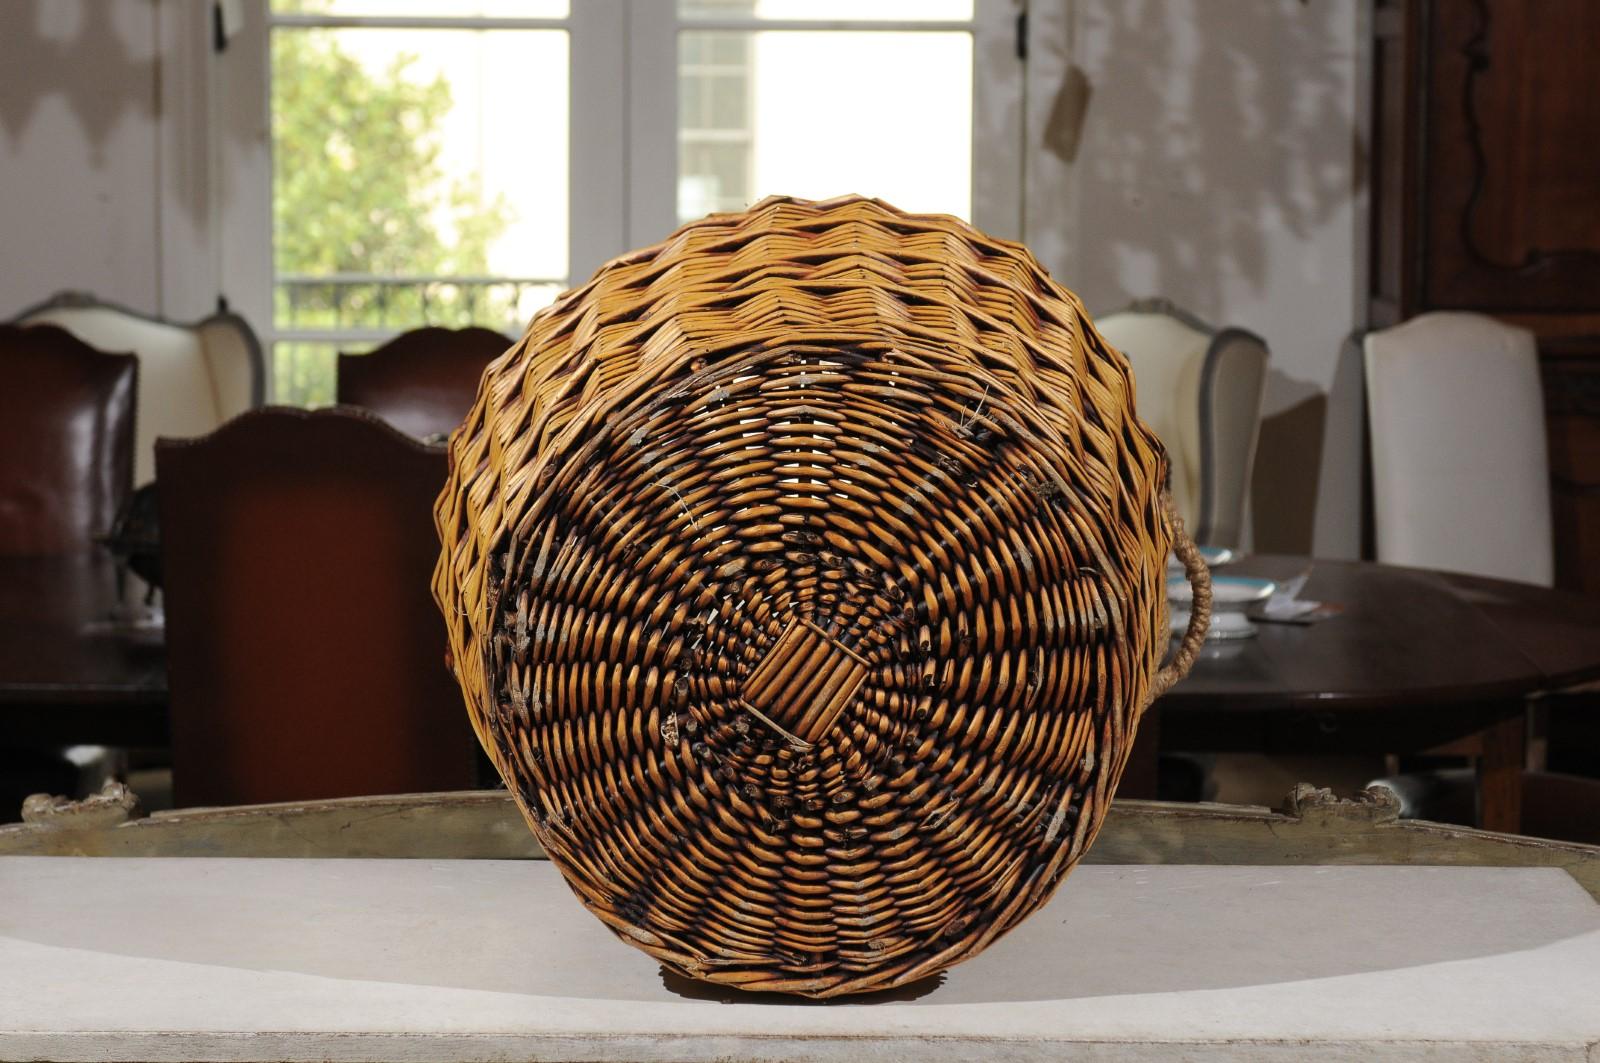 Rustic French Wicker Basket with Single Lateral Handle and Diagonal Patterns 8